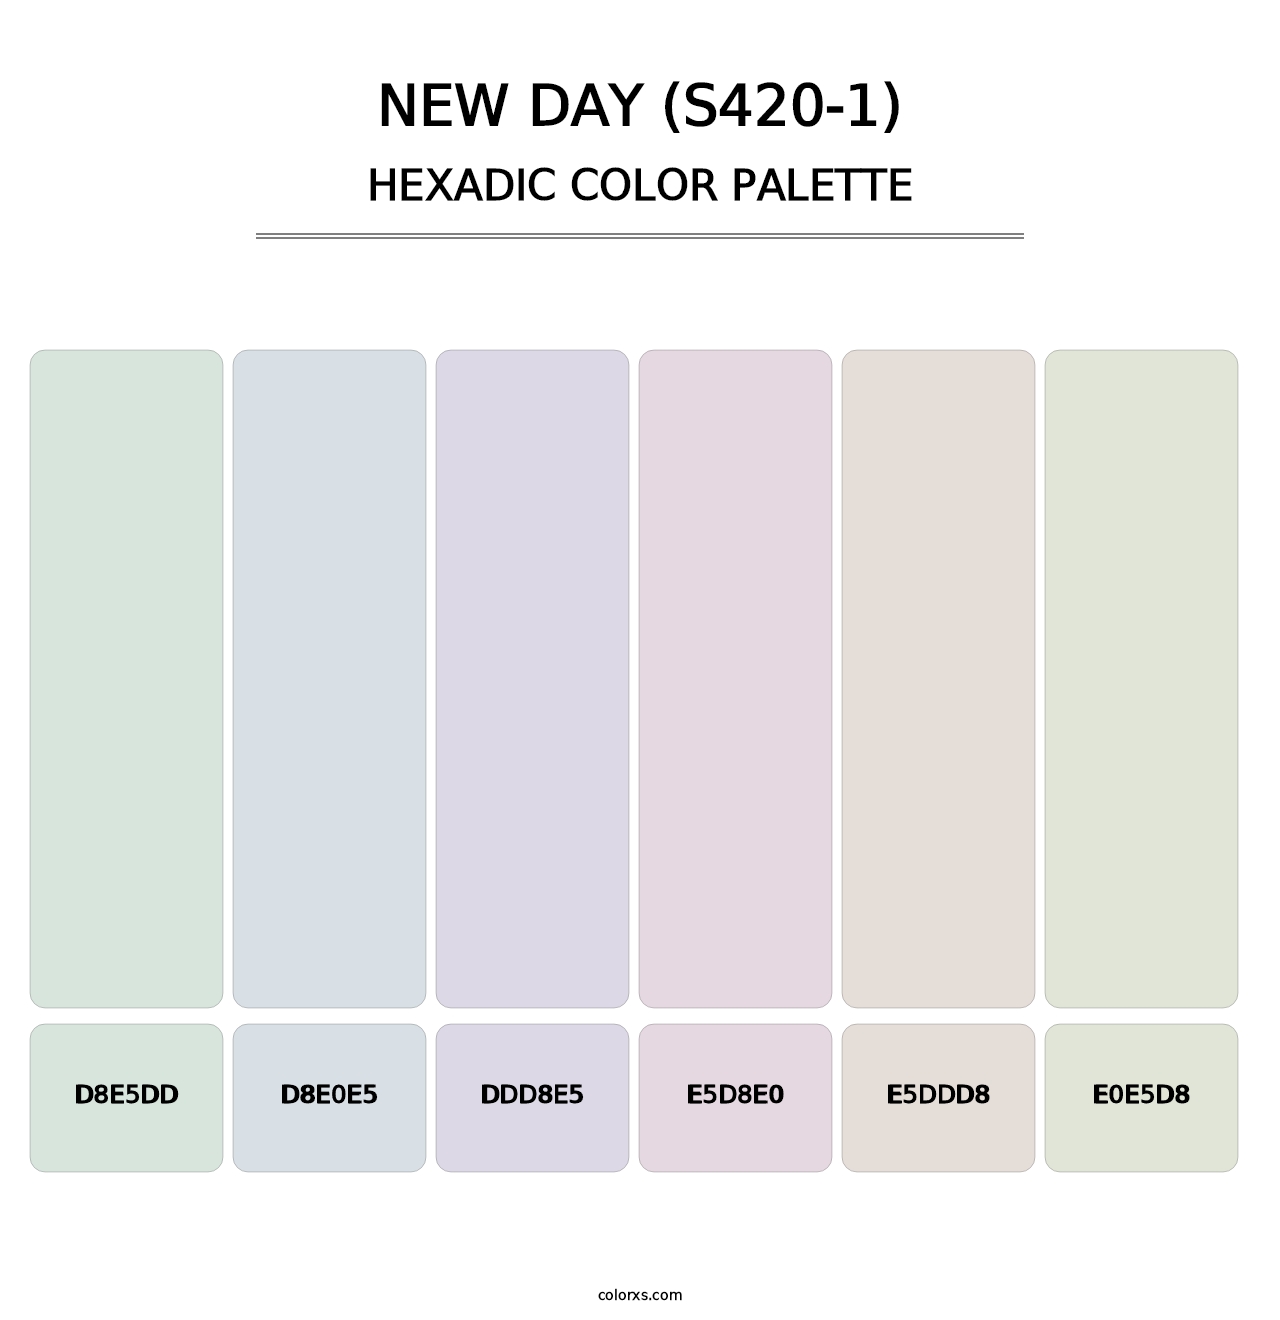 New Day (S420-1) - Hexadic Color Palette